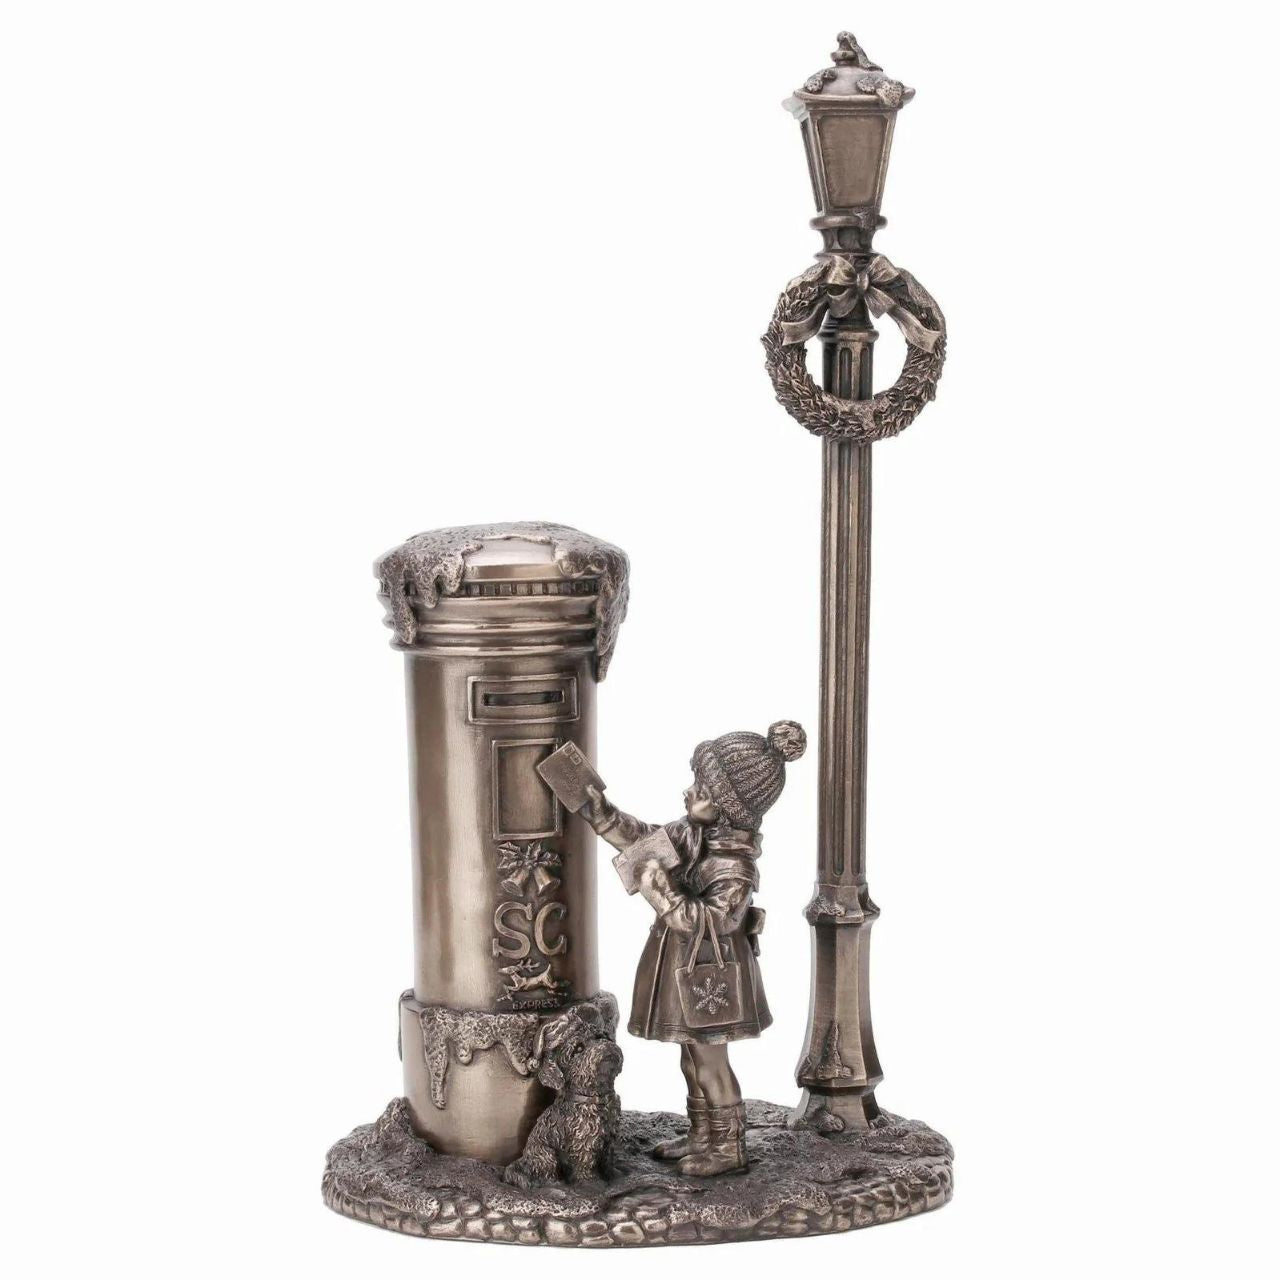 Genesis Letter To Santa  A stunning ornament that is sure to bring festive cheer to your home.  Genesis Fine Arts has evolved into a much loved and world famous Irish brand to produce a striking range of handcrafted cold cast bronze sculptures.